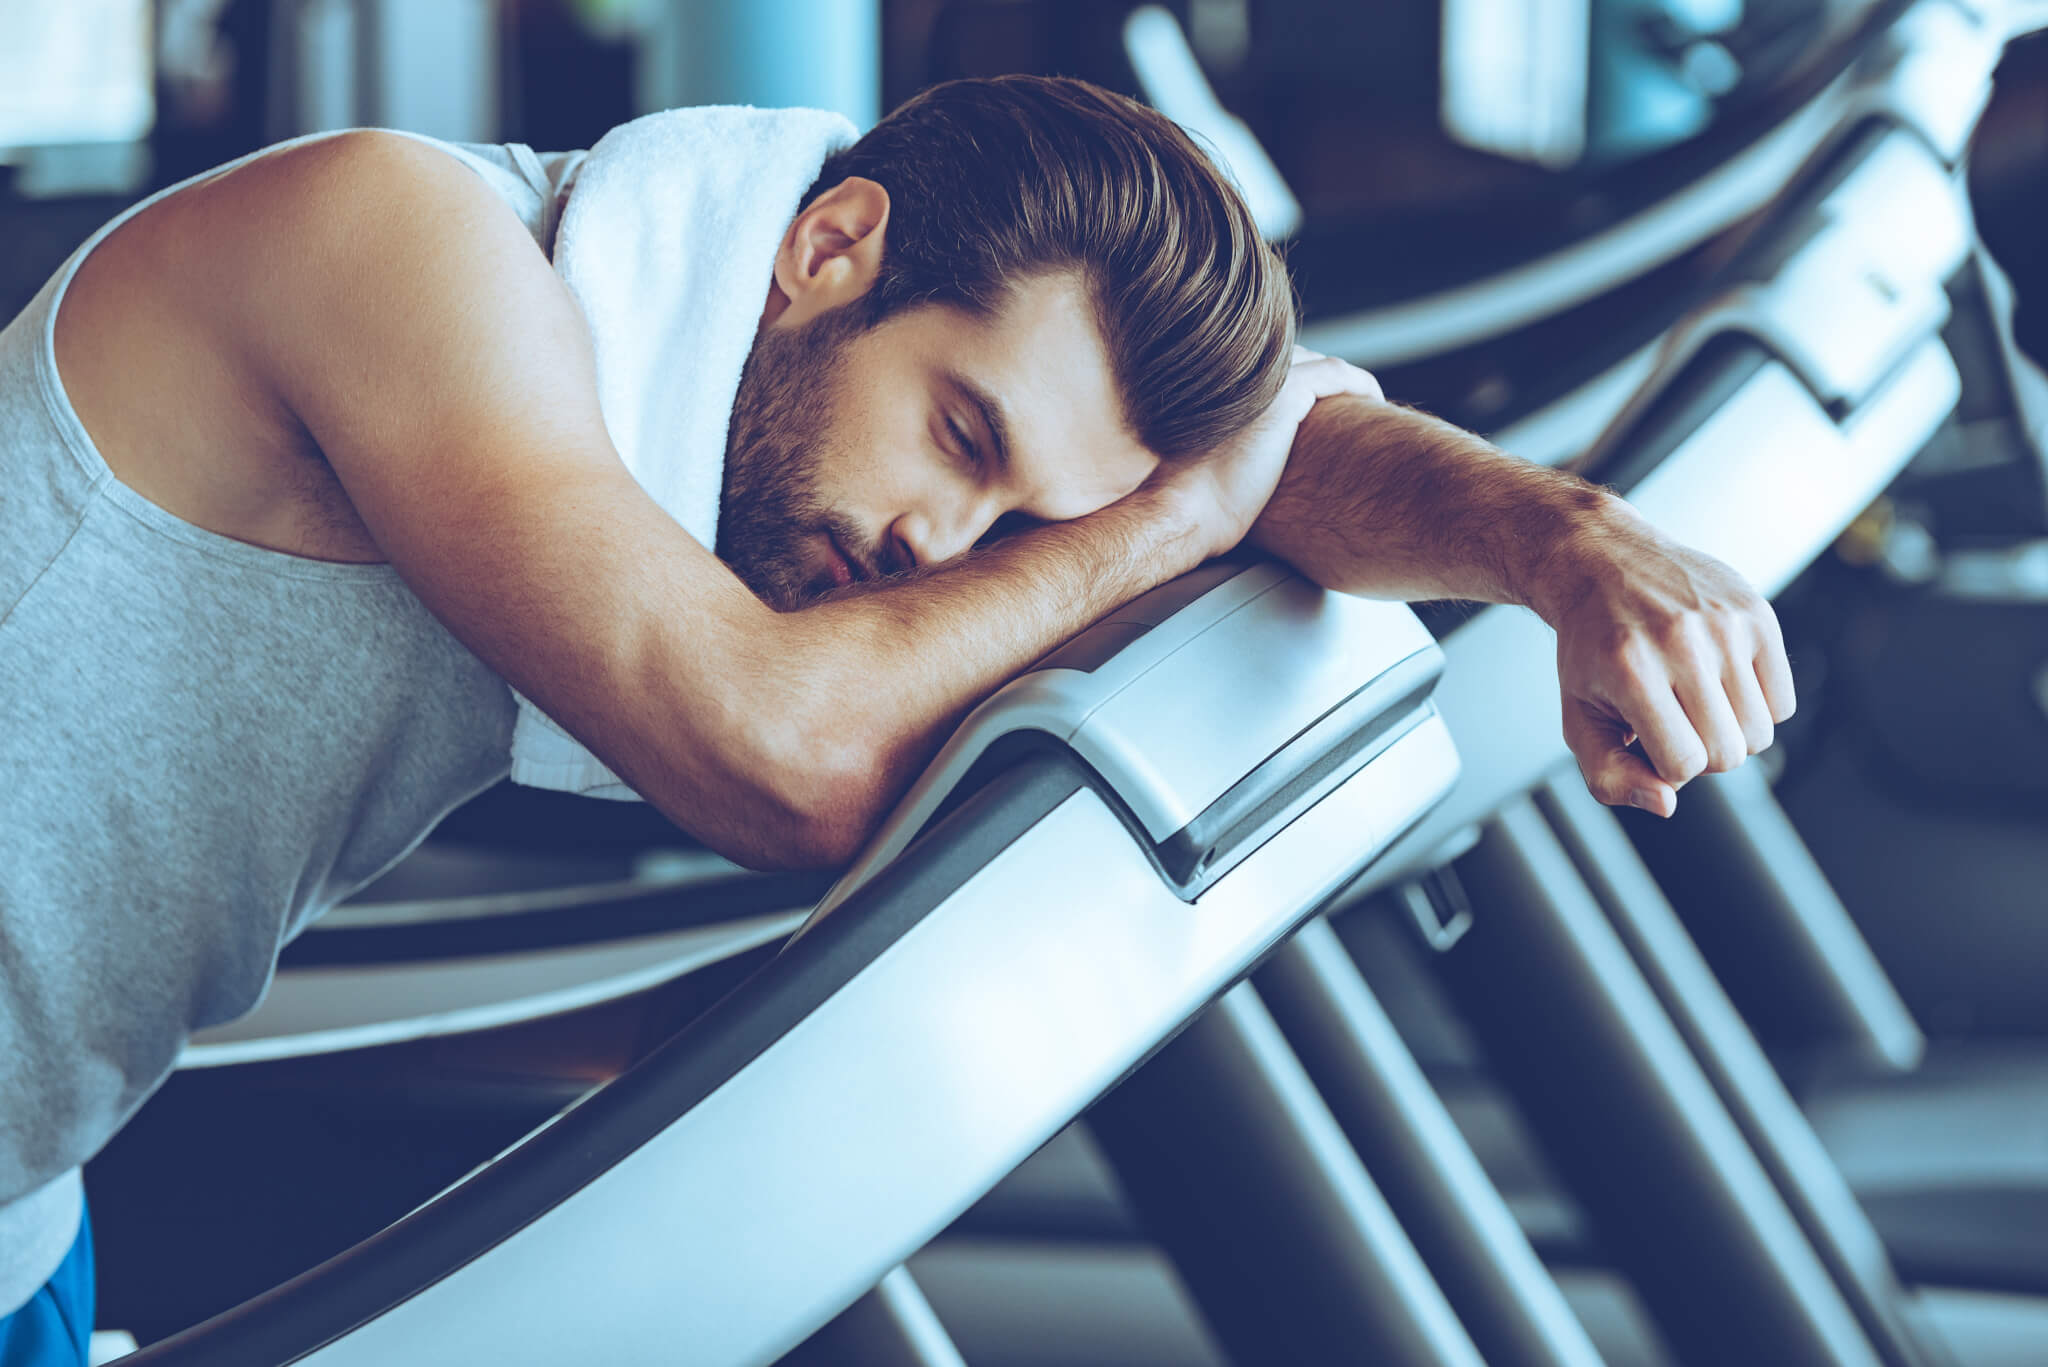 Man on treadmill at gym too tired to run